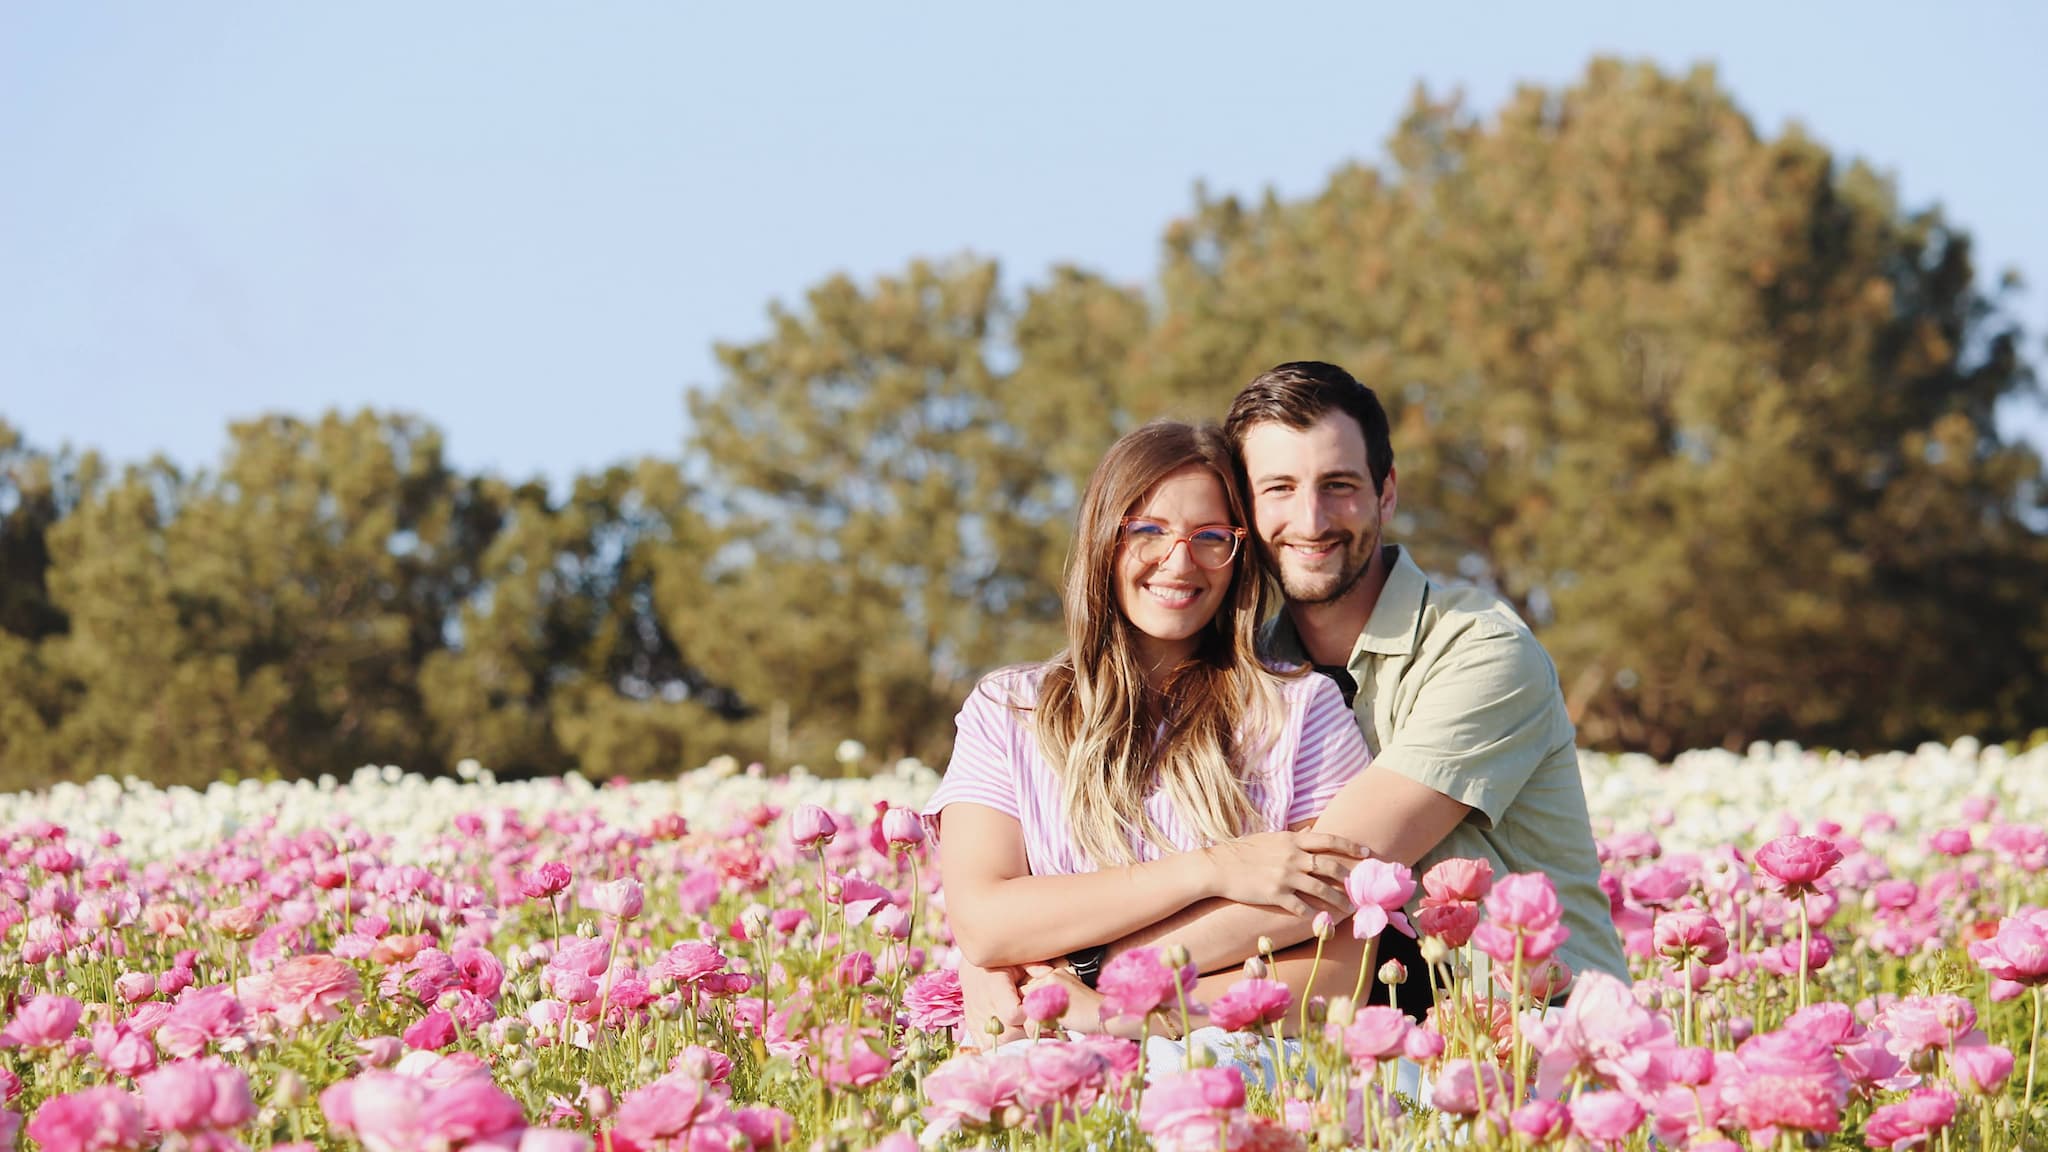 Couple sitting in flower field smiling at camera.